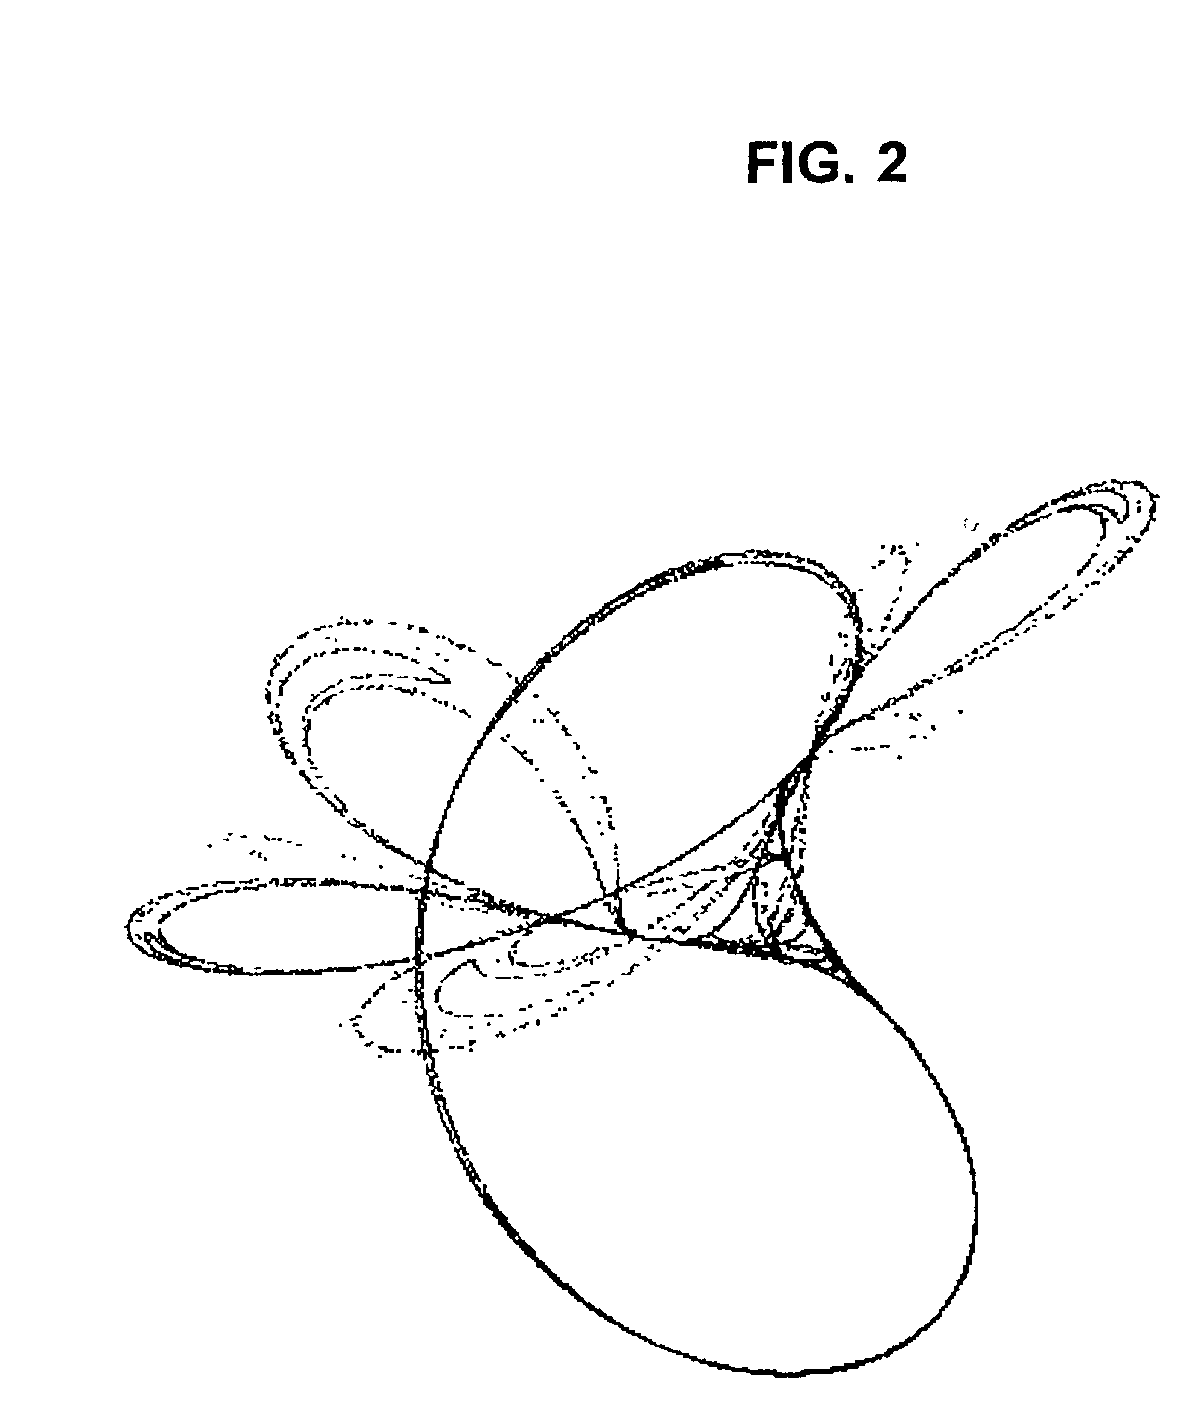 Method and apparatus for encryption of data